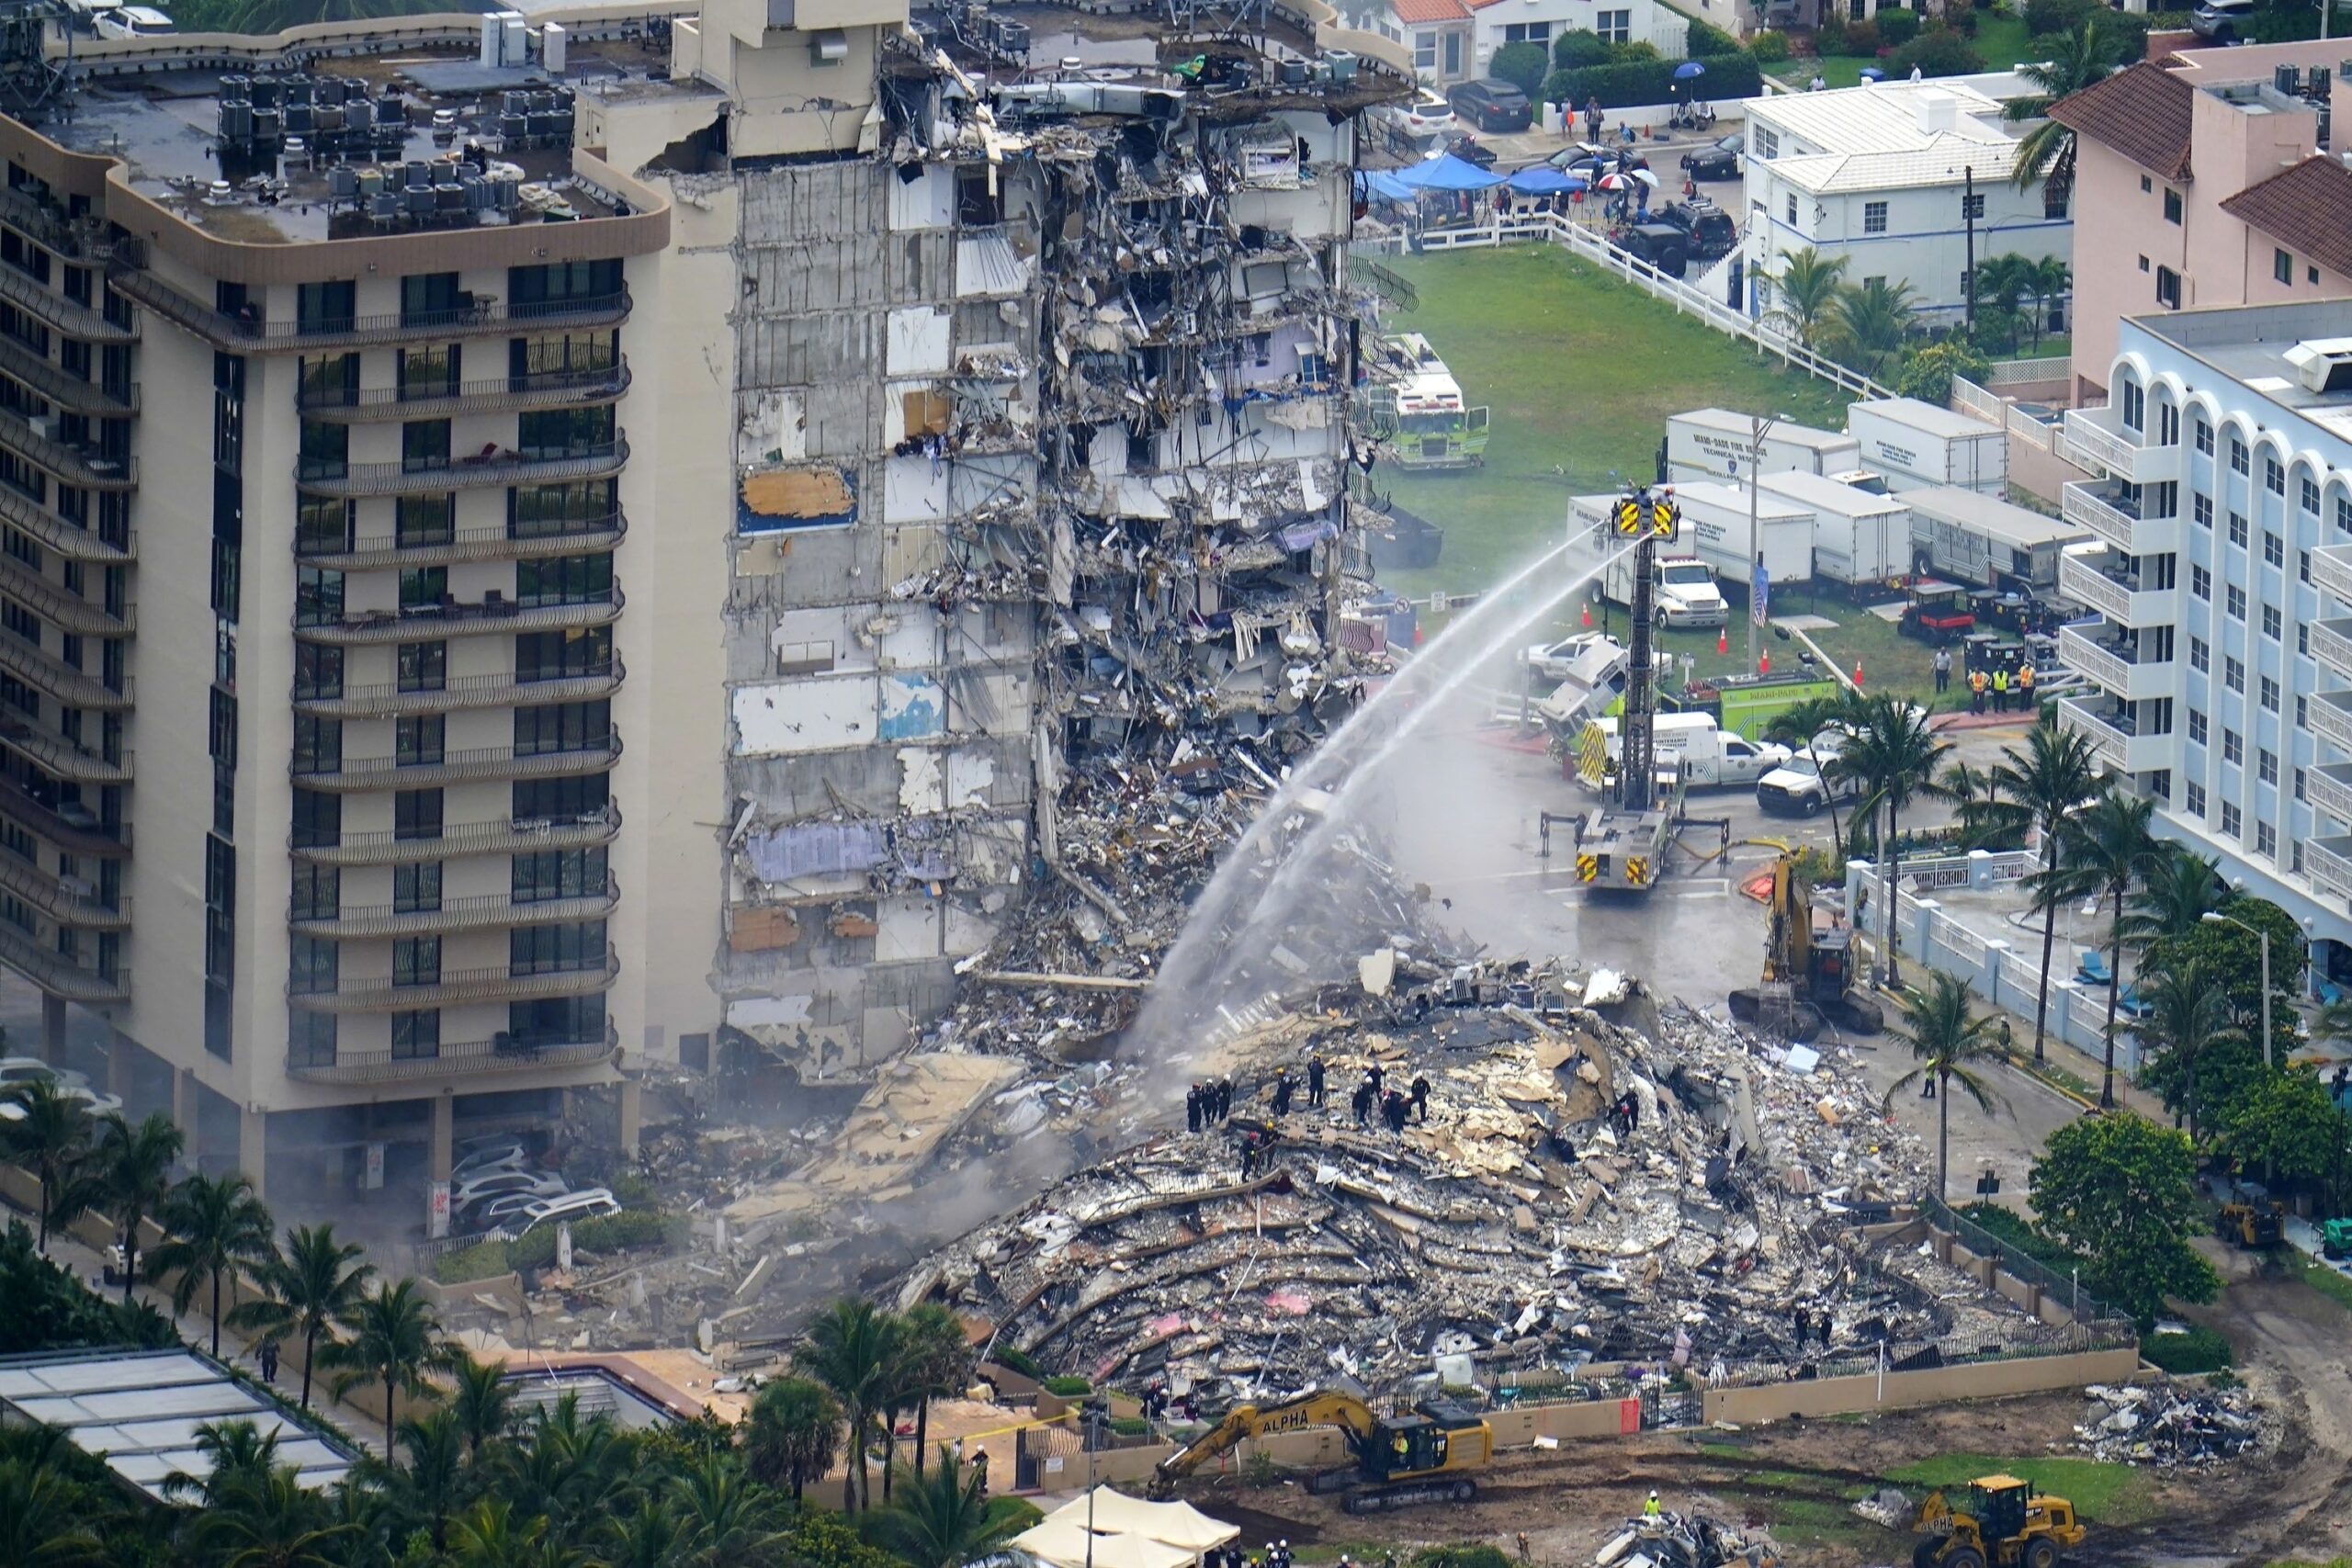 Surfside condo collapse investigators provide key insights into possible causes of the disaster. Here are the top takeaways - Accidents and Disasters - News